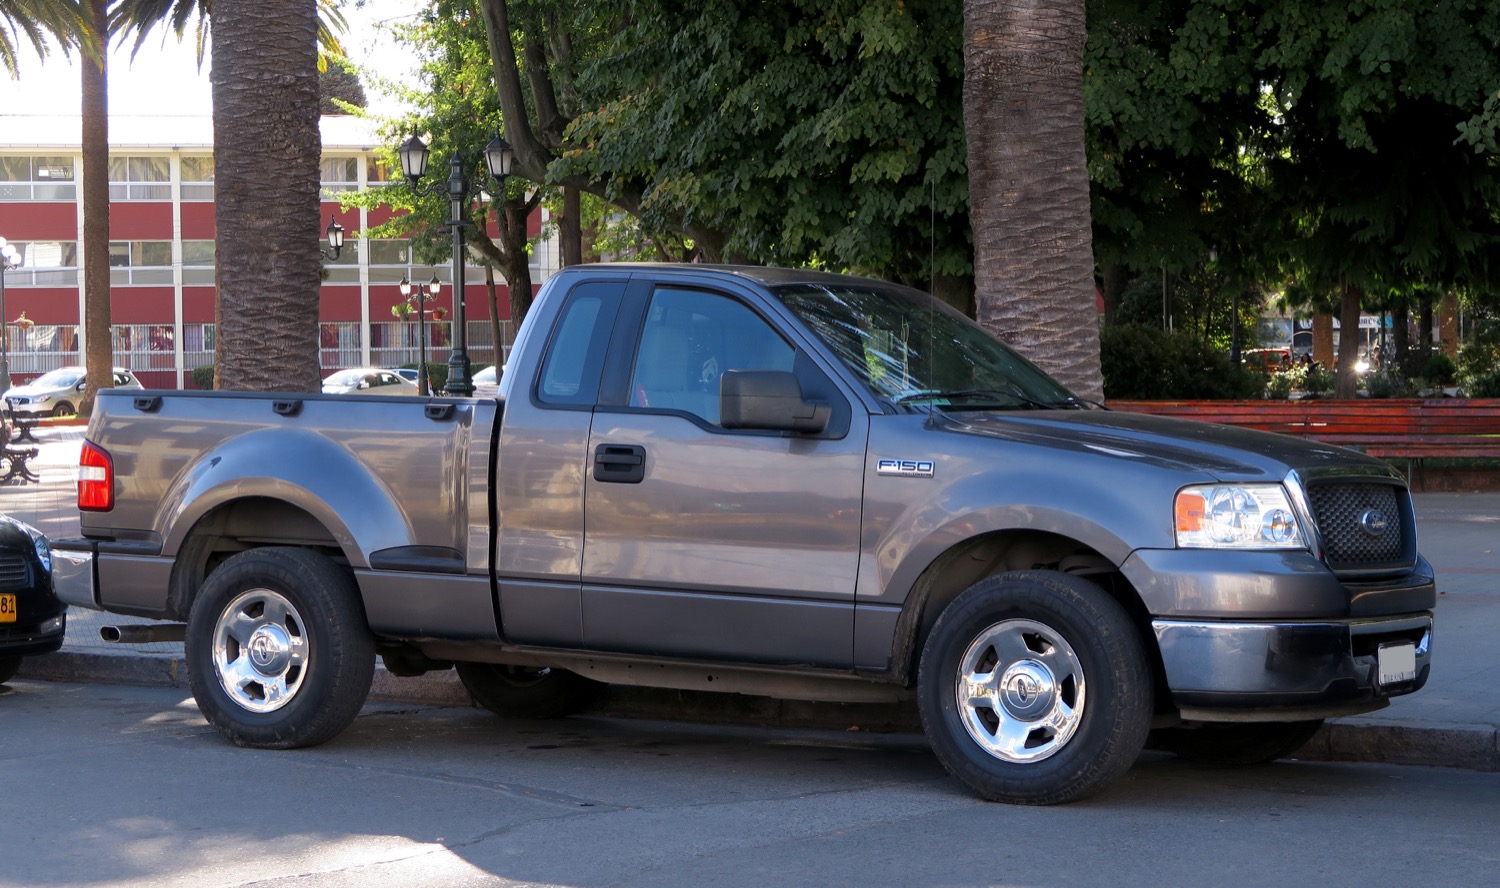 Ford F-150 Is Good Enough For NFL QB Philip Rivers 2008 Ford F150 5.4 Triton Towing Capacity